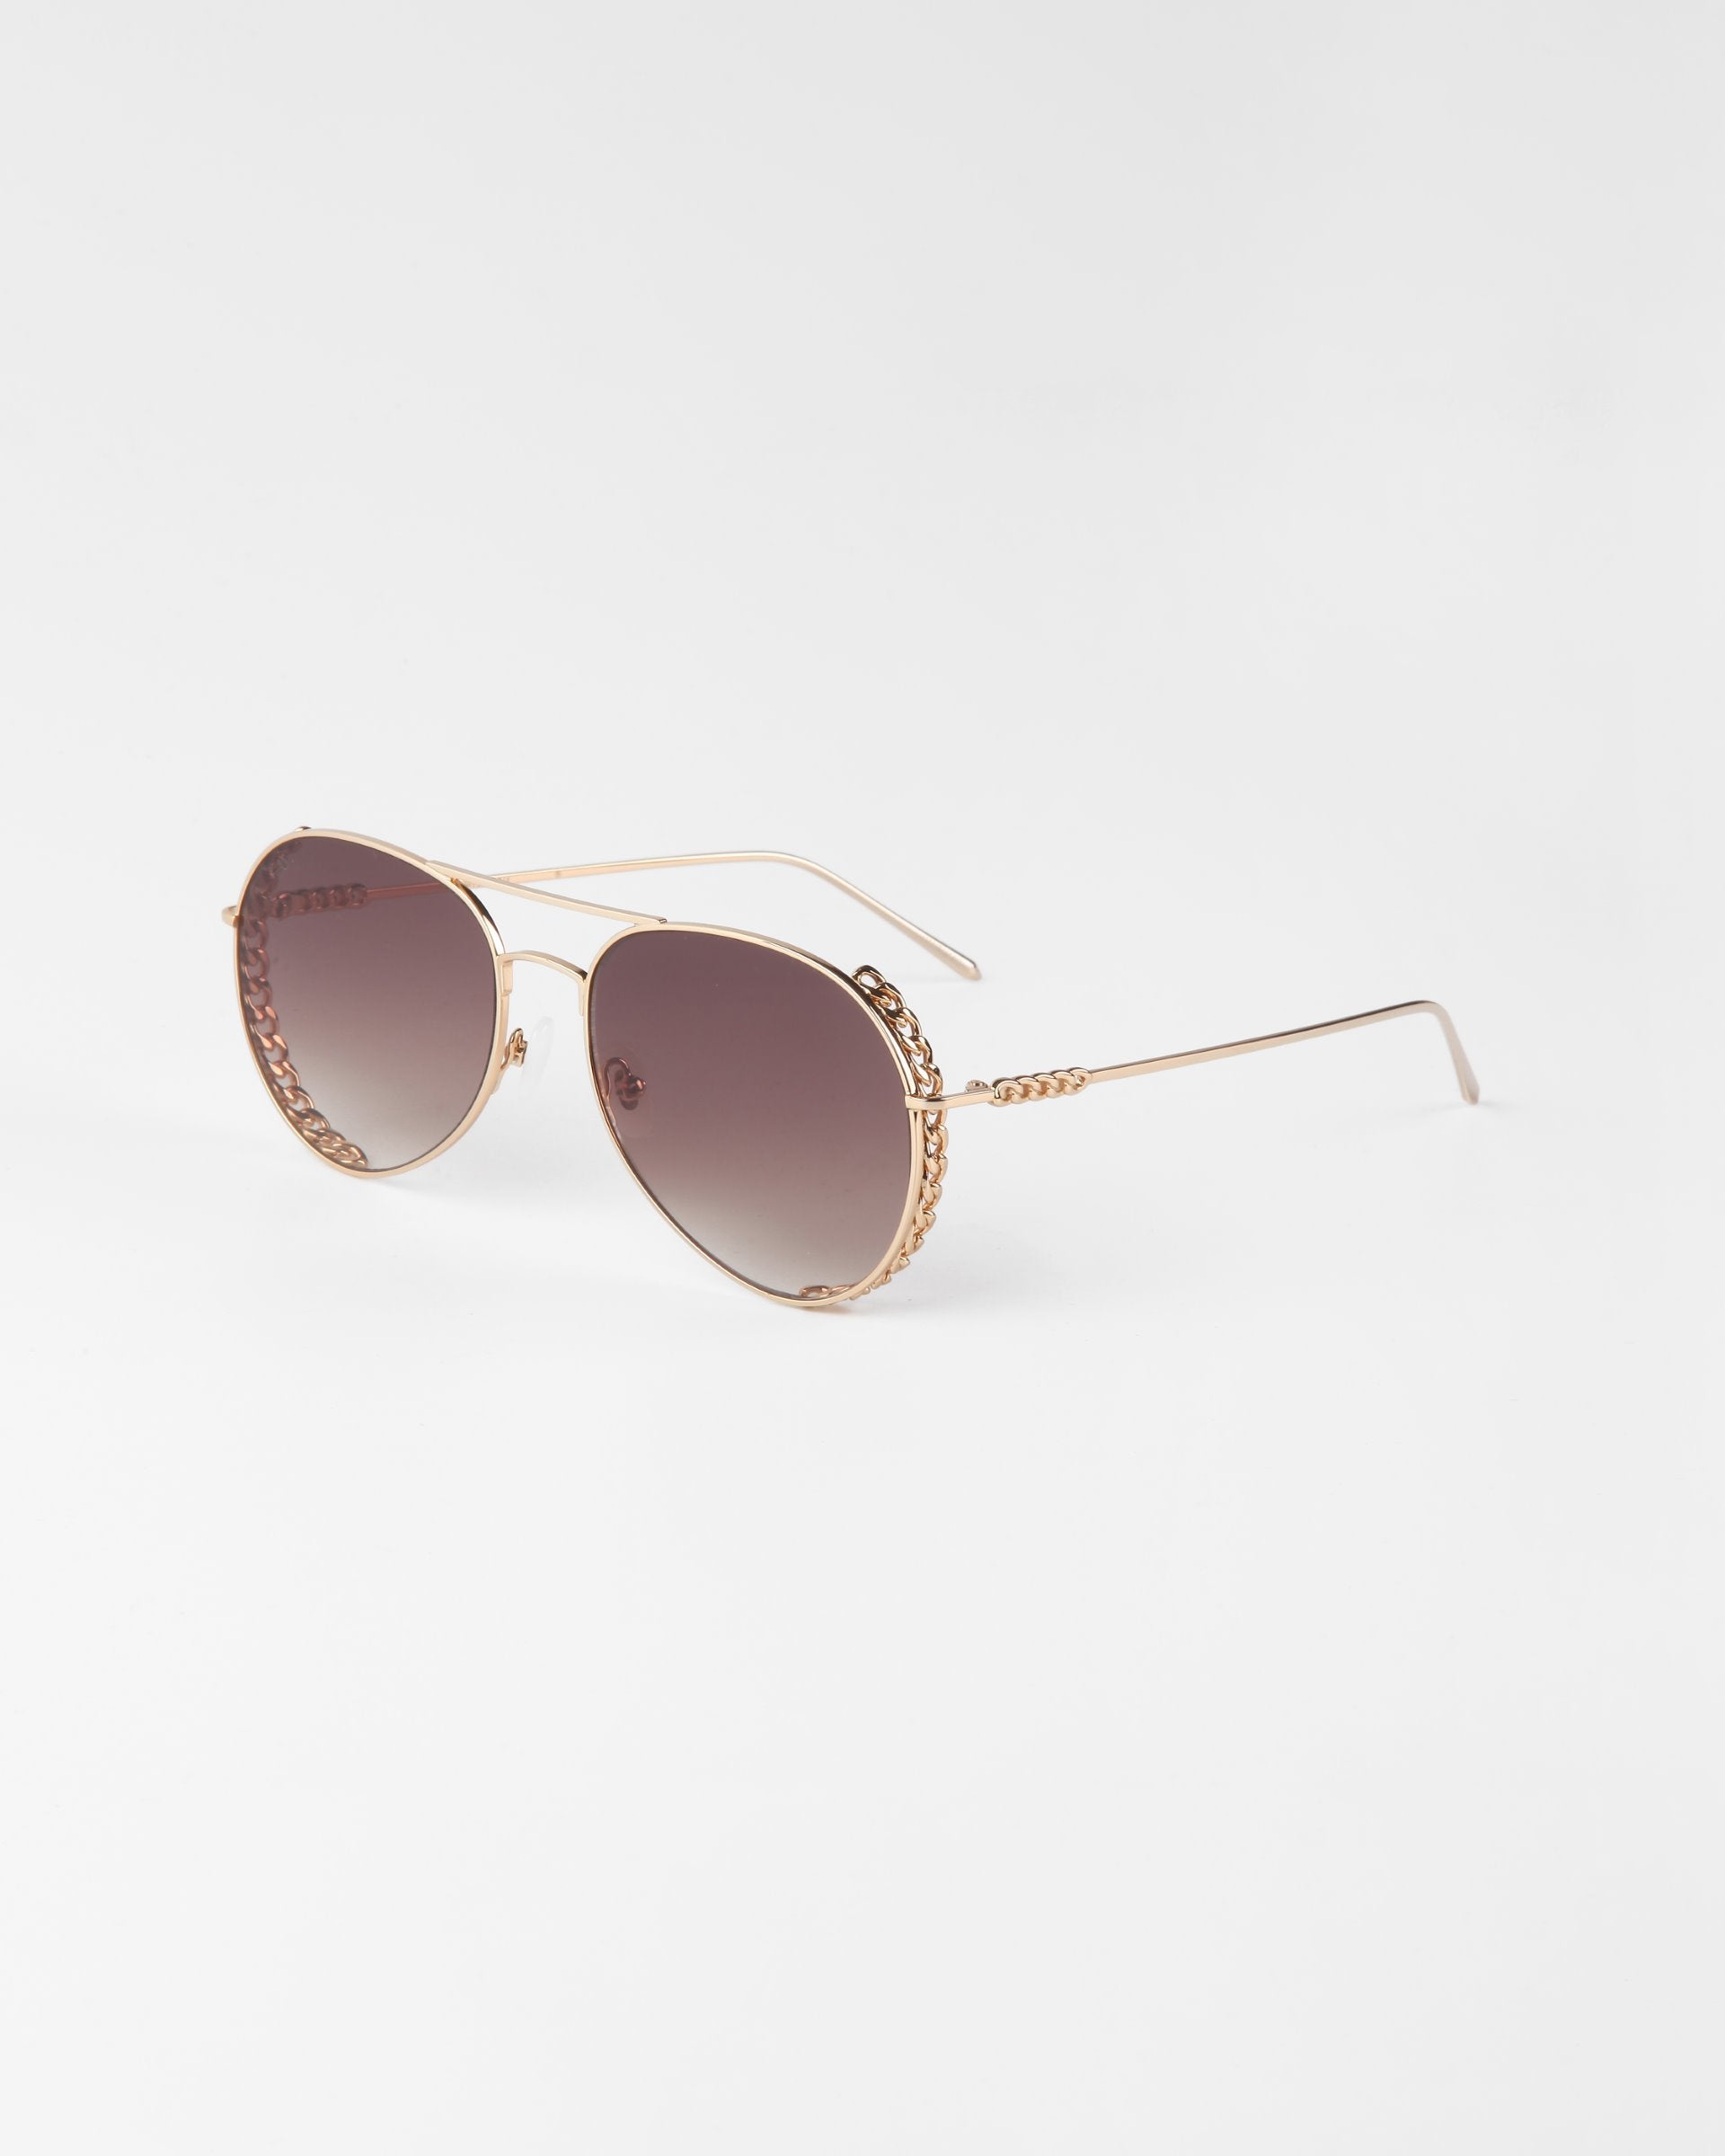 A pair of Links sunglasses by For Art&#39;s Sake® with gold-plated stainless steel frames and gradient brown nylon lenses, showcased on a white background. The sunglasses feature a braided detail on the brow bar and temple tips.